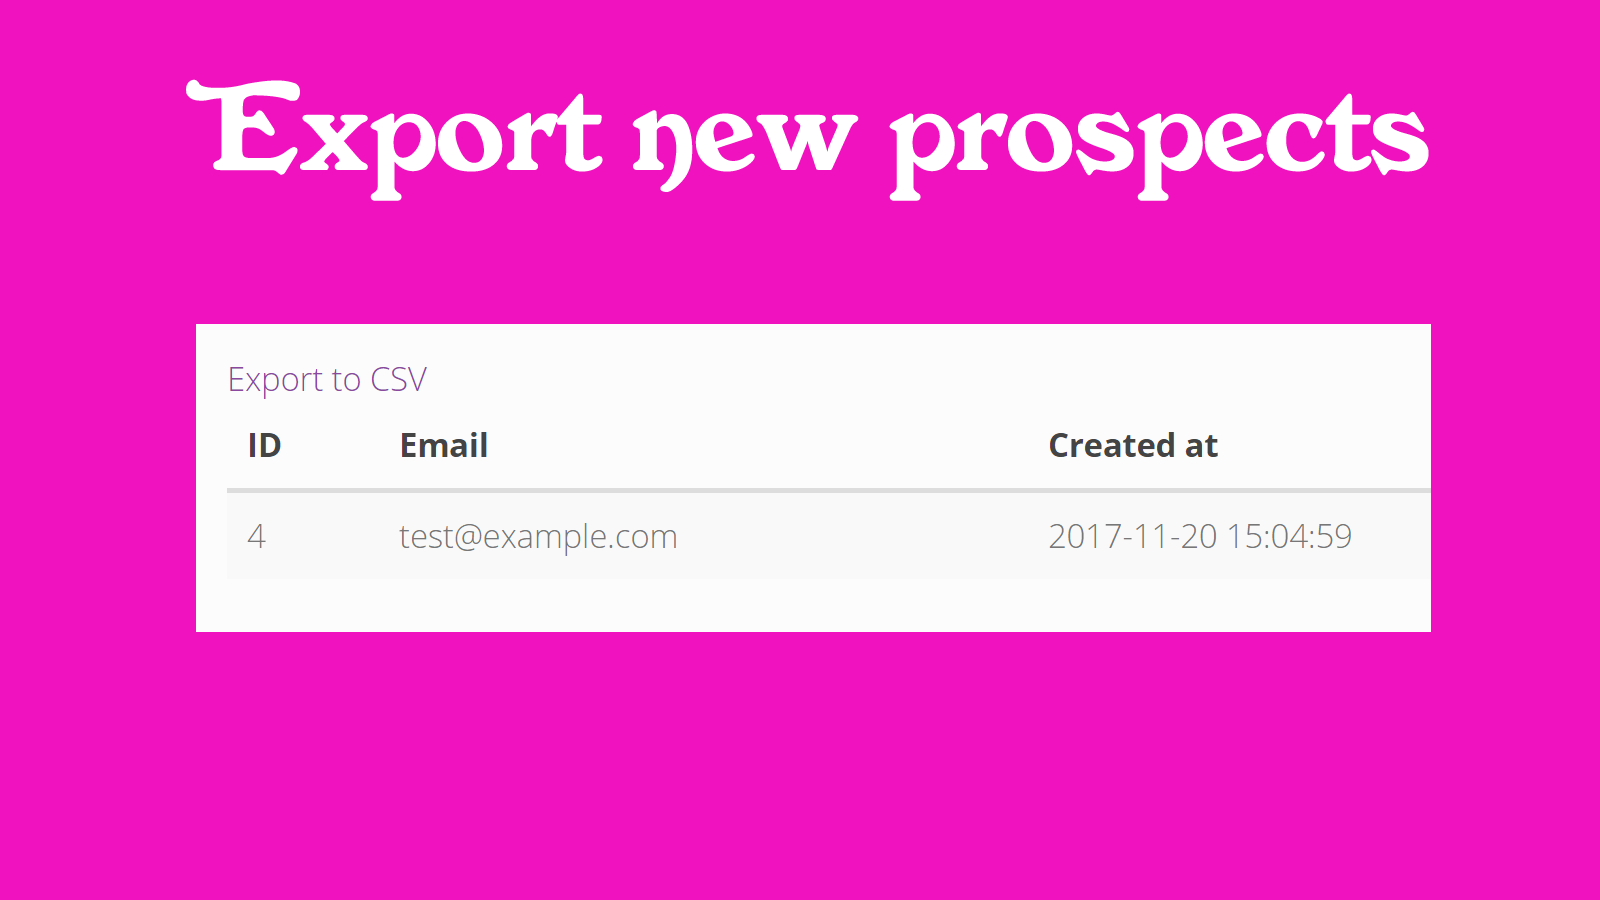 One-click export to CSV